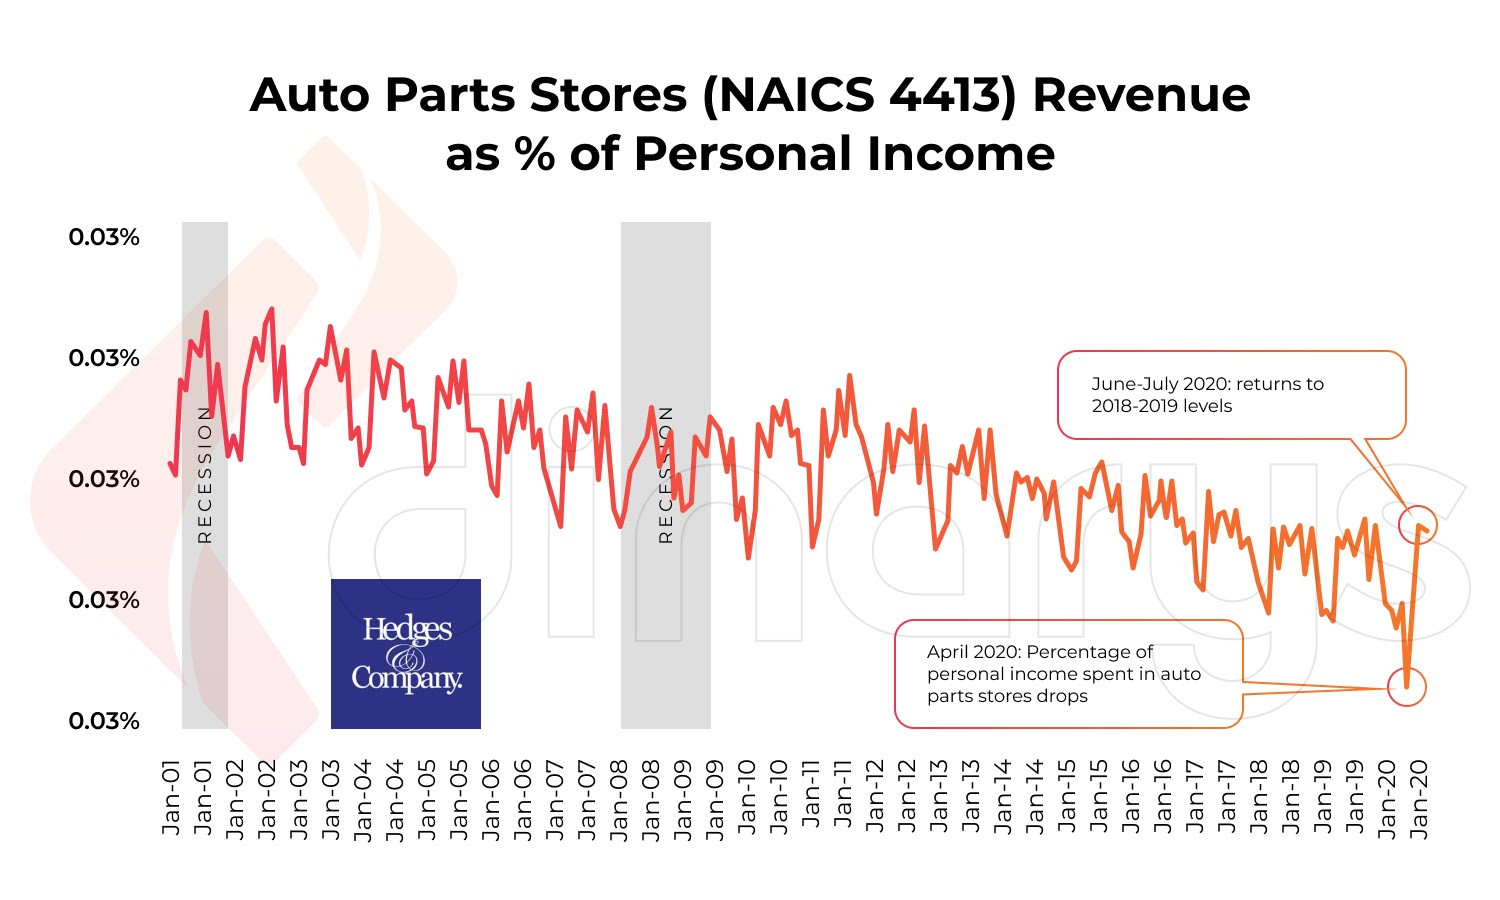 Auto parts stores revenue has declined, partly because customers often prefer online shopping.